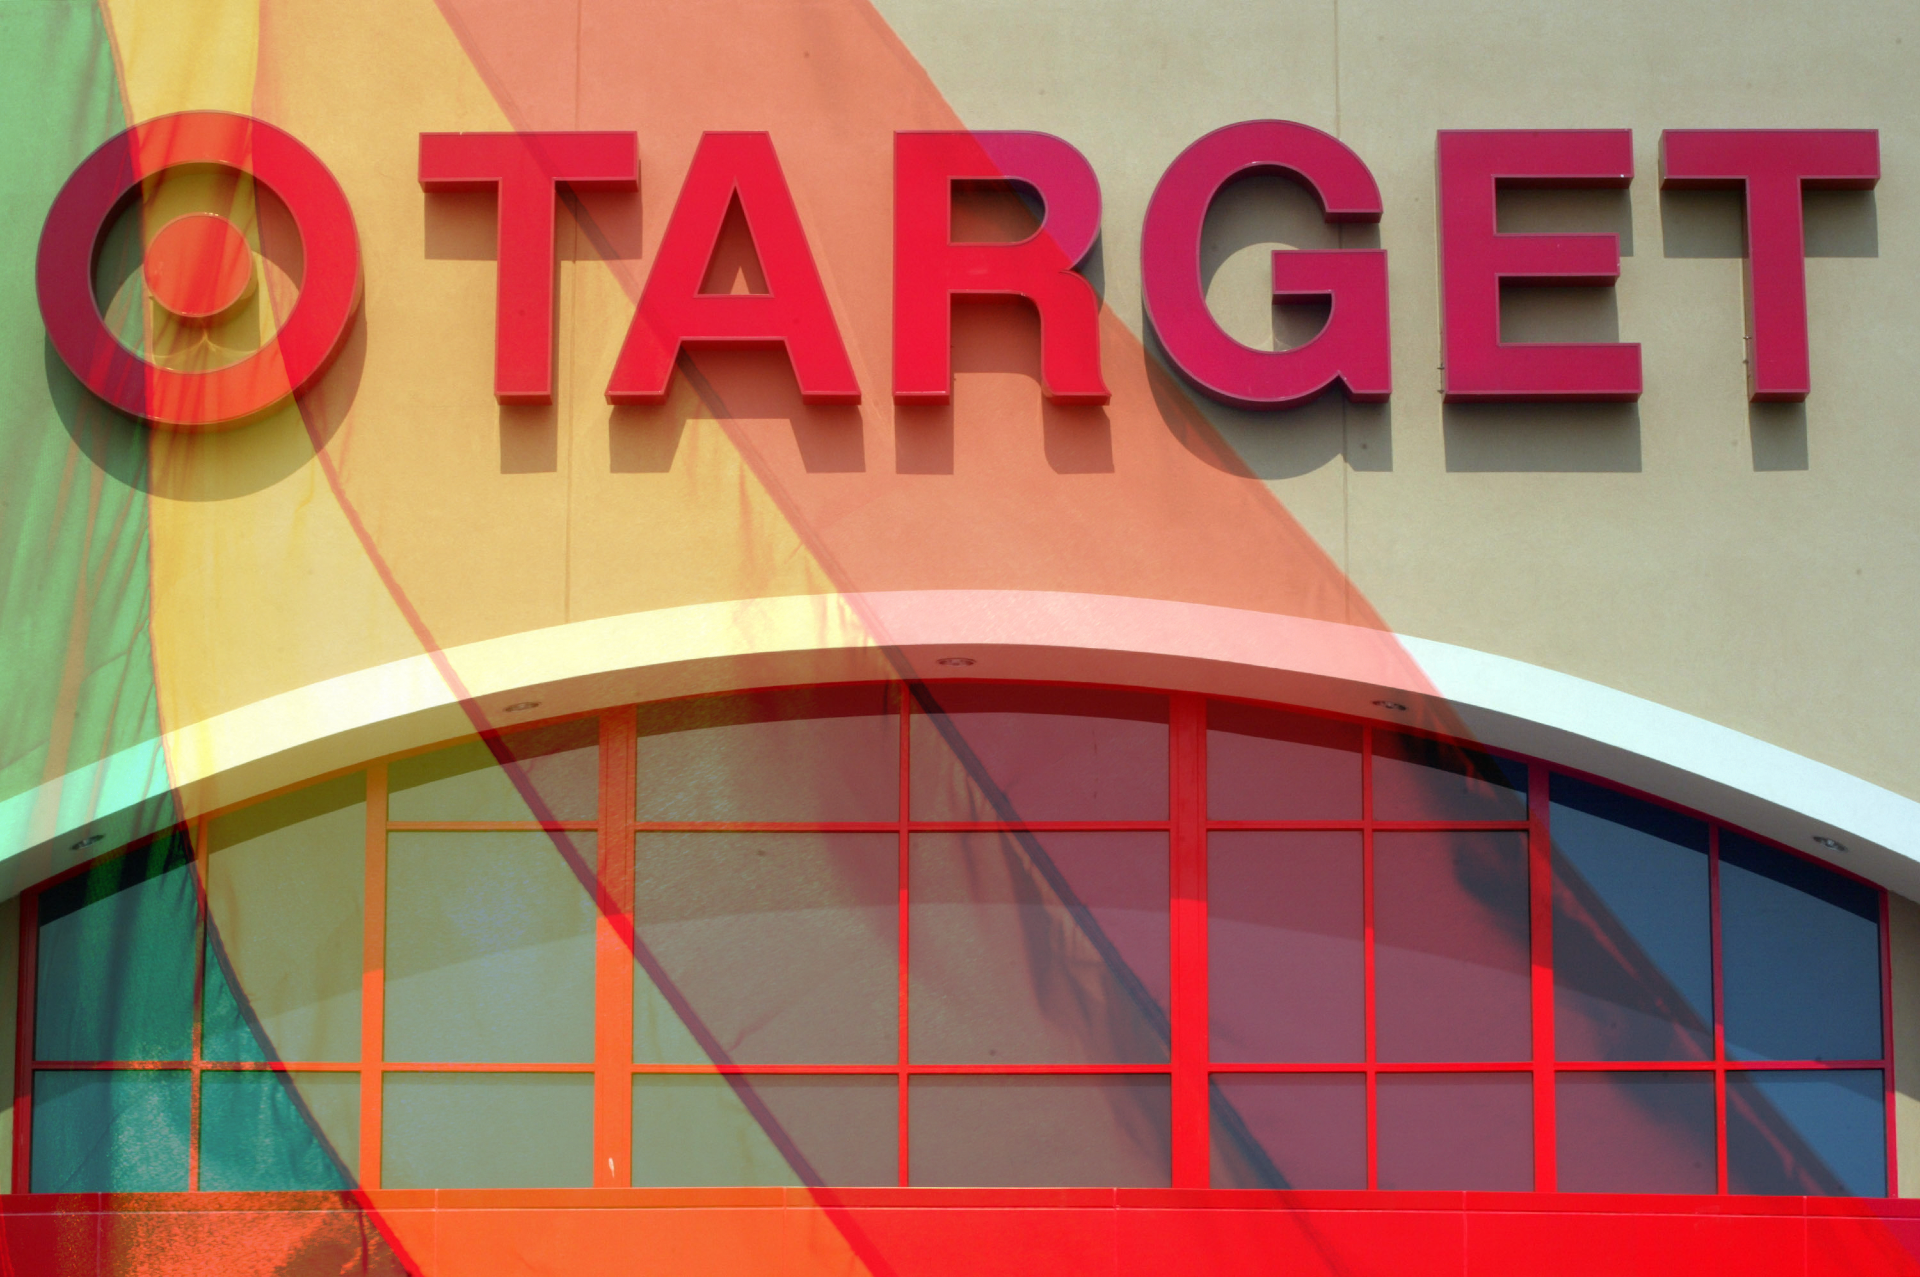 When Target pulled back on Pride merch, these small queer-owned